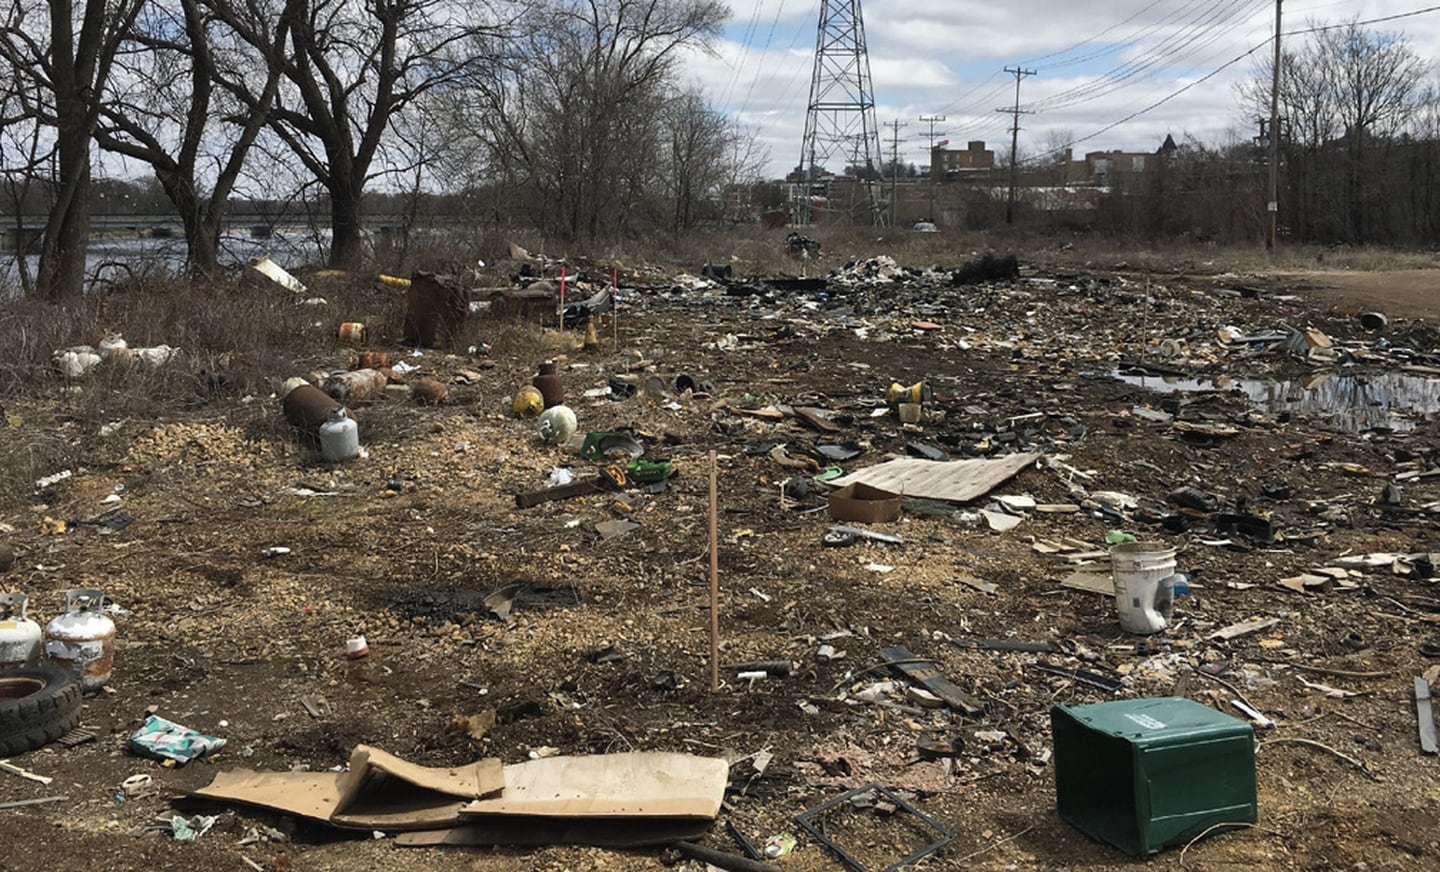 The U.S. Environmental Protection Agency has completed nearly $4 million of cleanup at the former Dixon Iron & Metal Co. scrapyard, and city officials are taking the next steps in priming the property for future riverfront development.